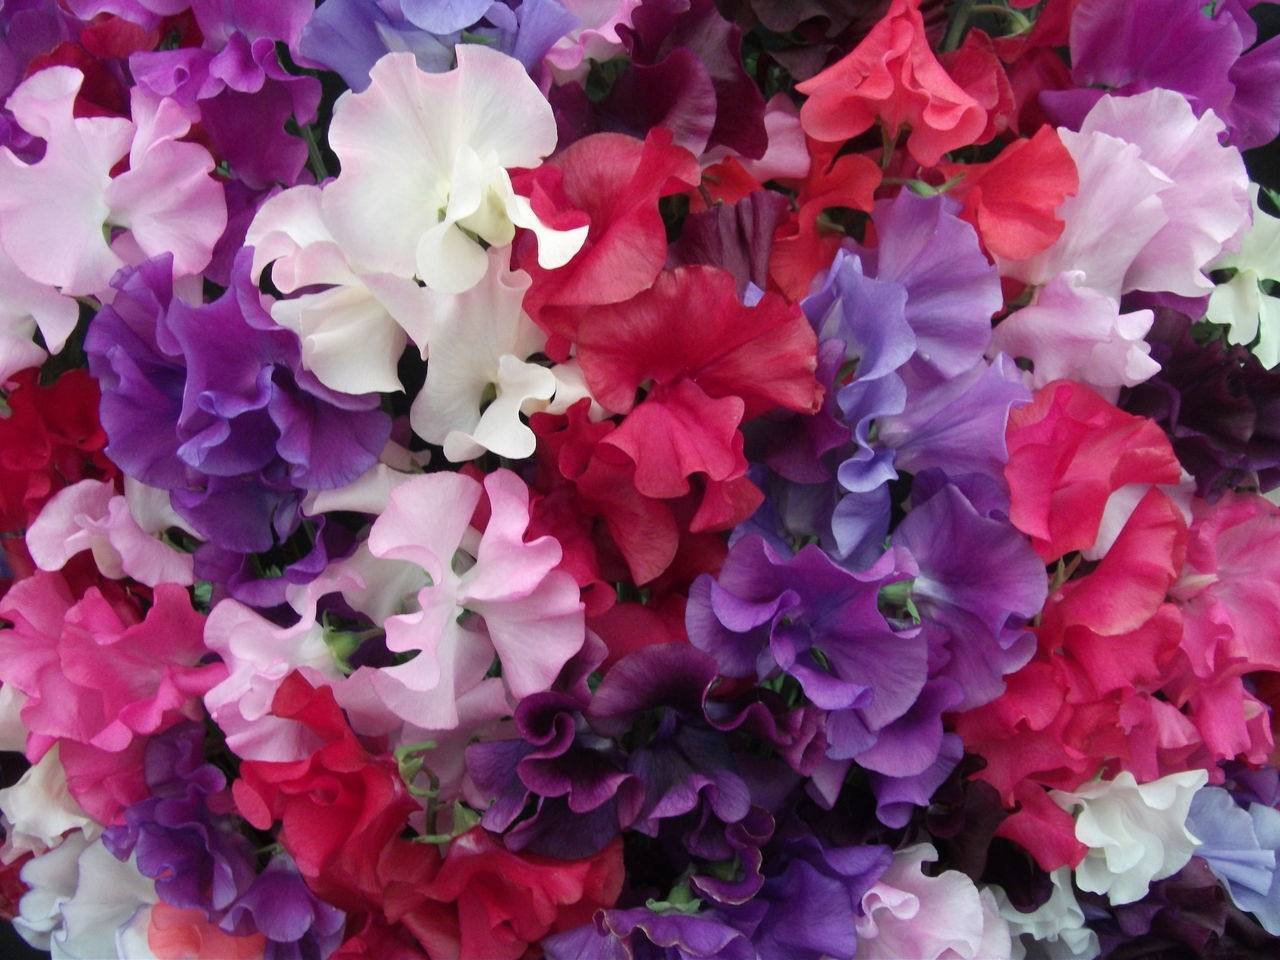 Sweet peas are a colorful addition to your spring garden.